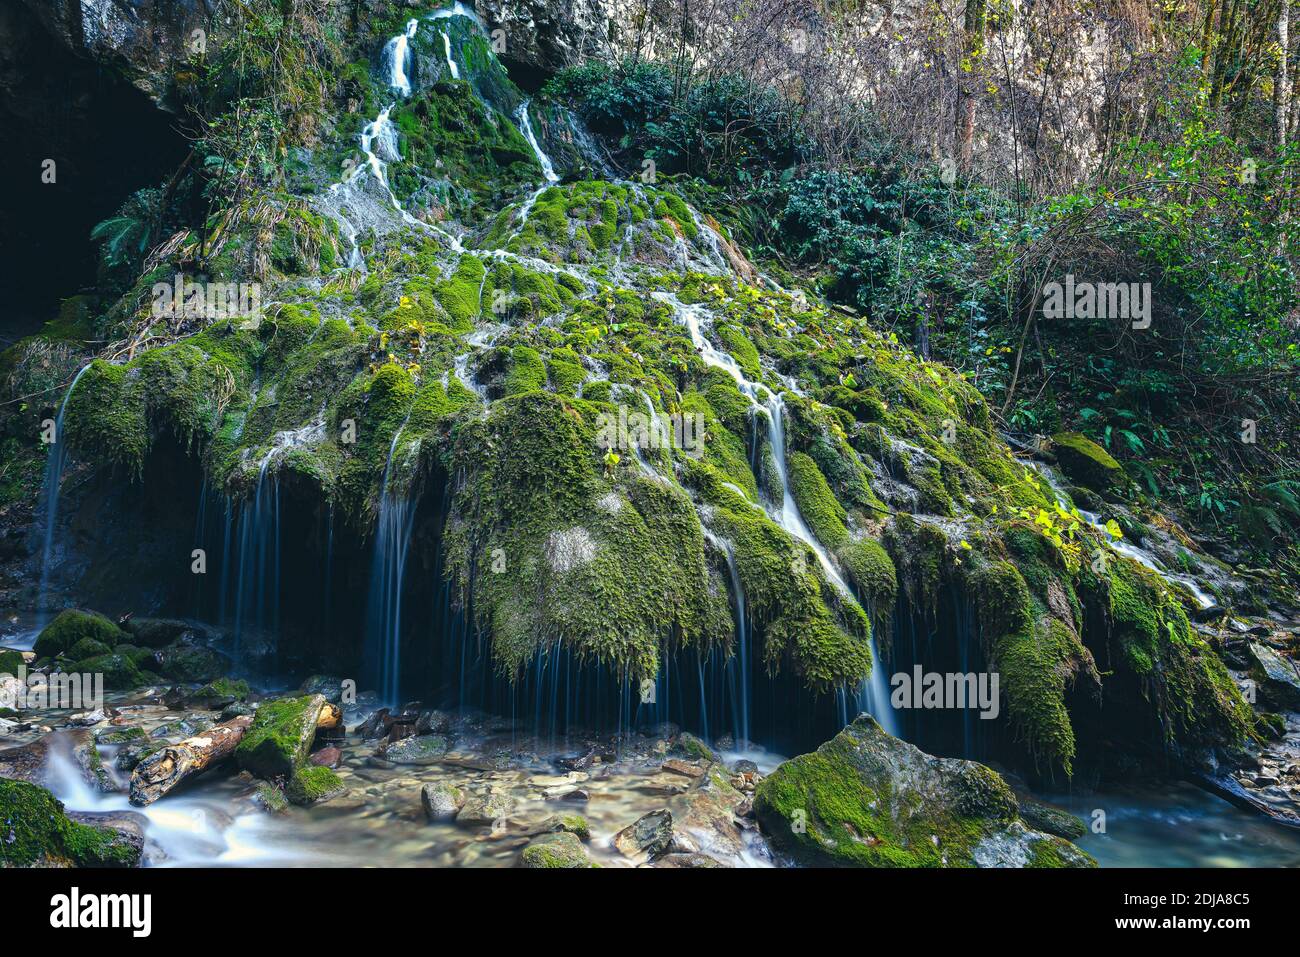 Water flowing on a big rock covered by moss. Valli del Natisone nature spectacle, Friuli Venezia Giulia, Udine province, Italy. Stock Photo